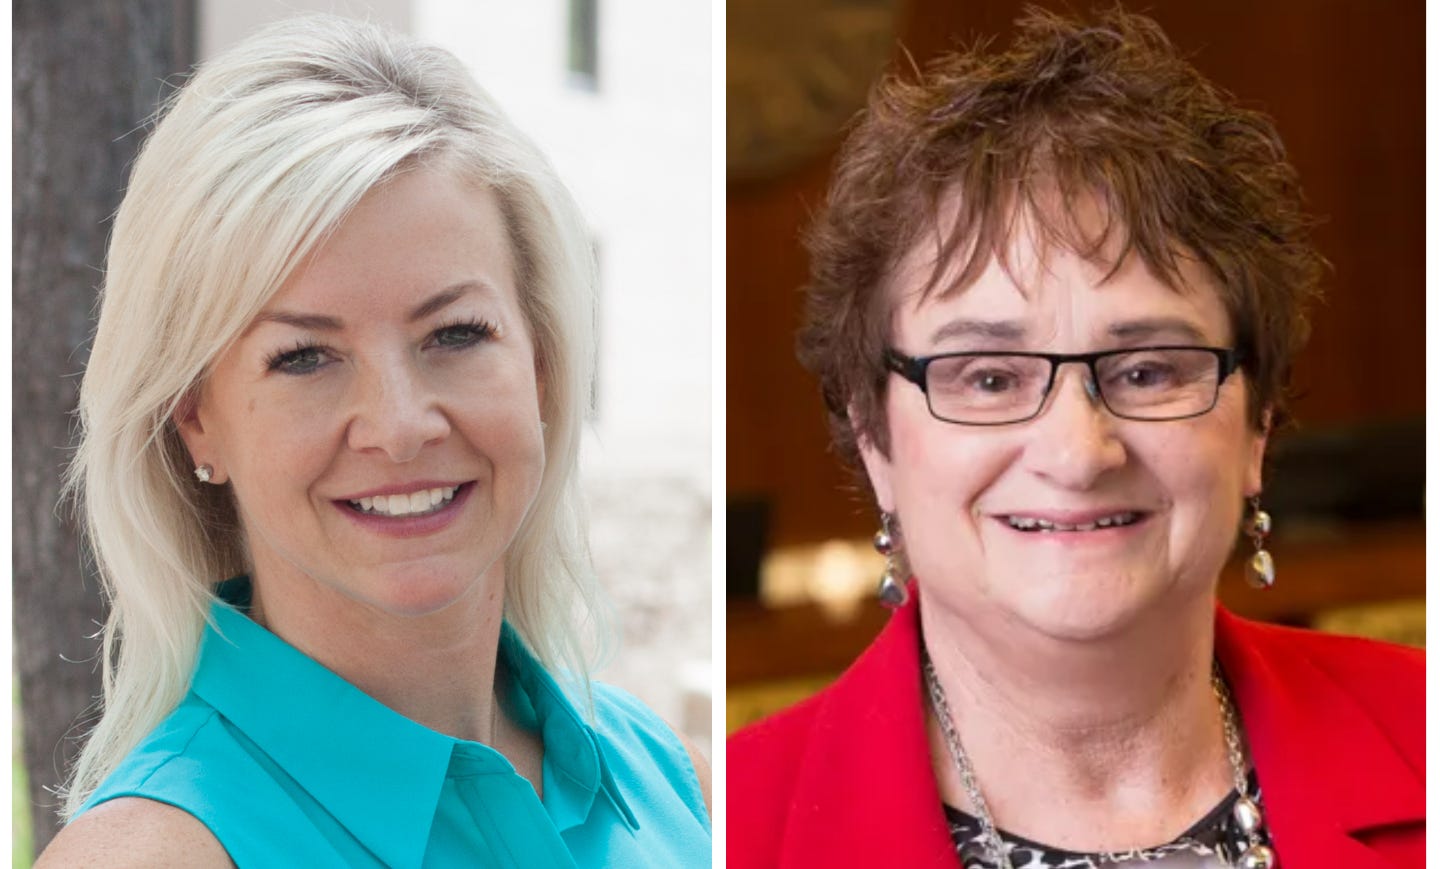 Jennifer Crawford (left) and Vicki Hunt are running for the Acacia District, Peoria City Council.